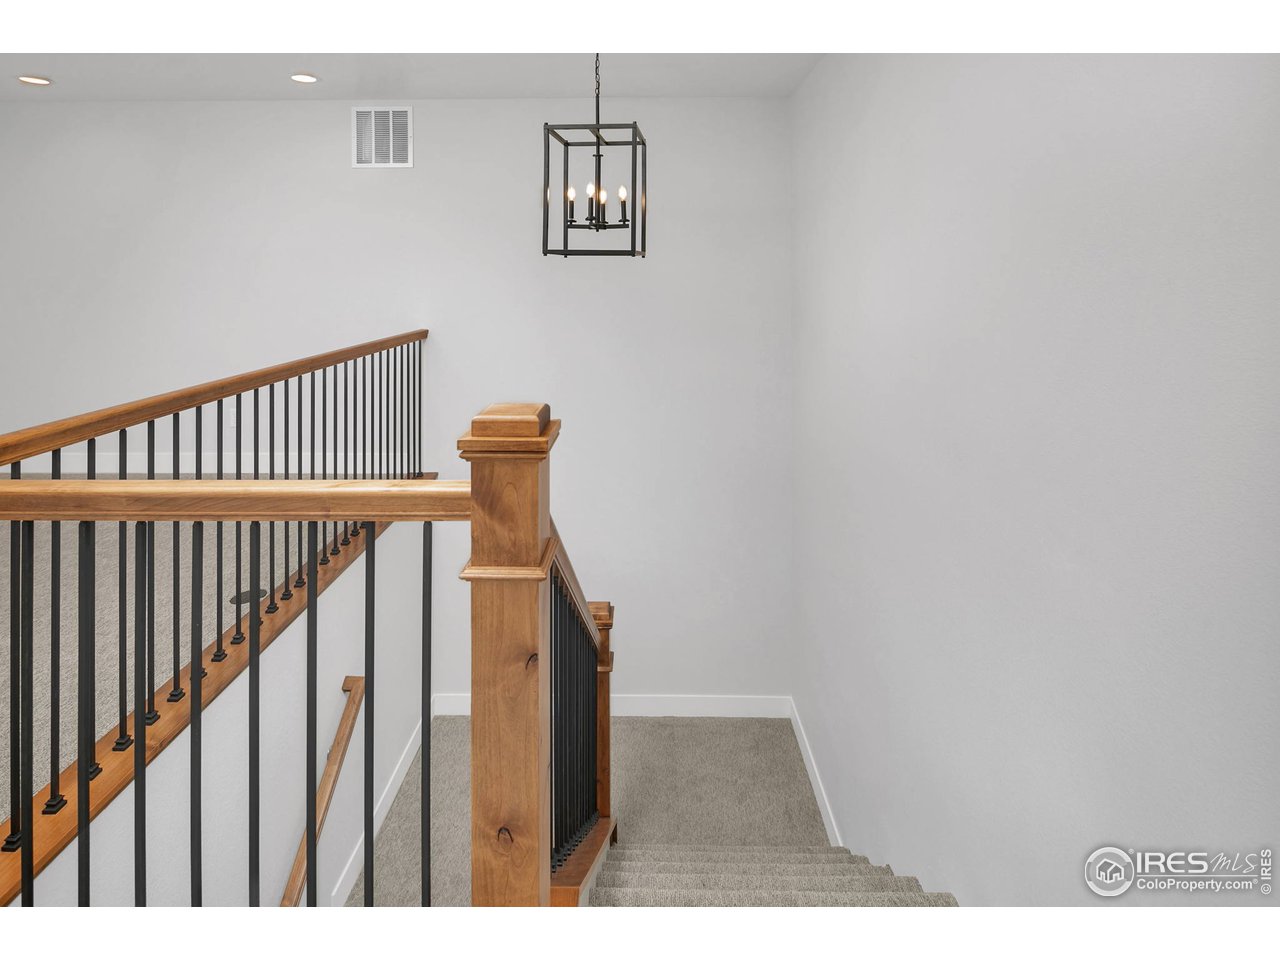 Stylish wood banisters & wrought iron balusters define the space 